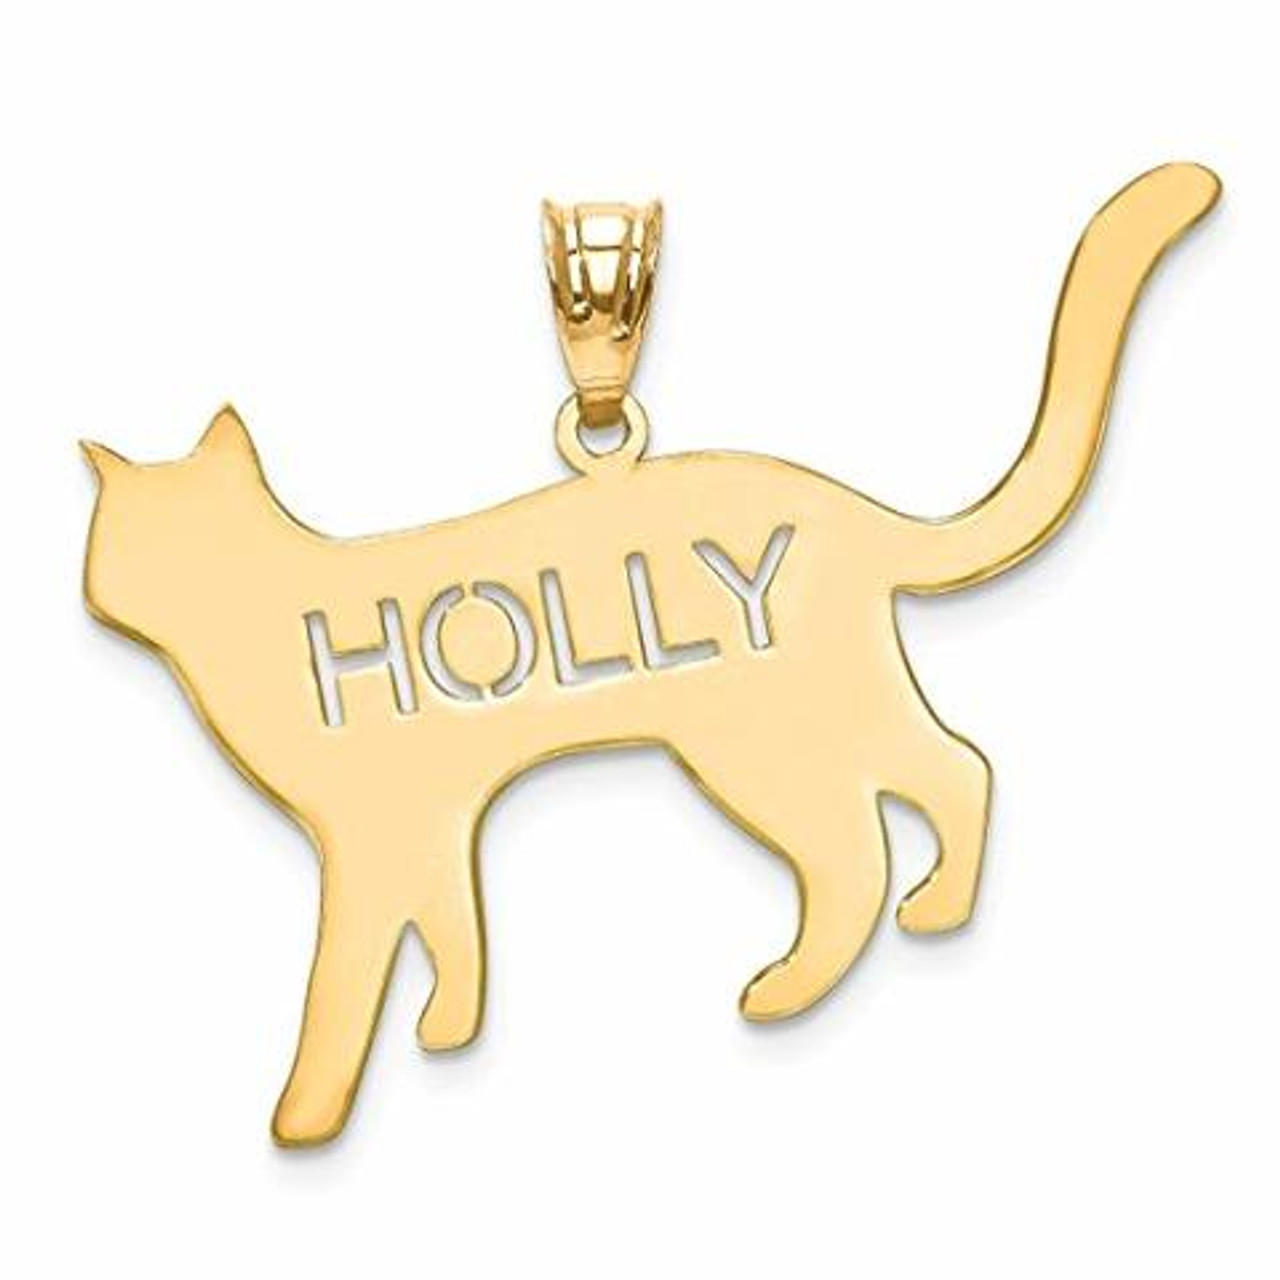 Dog and Cat Silhouette Necklace Dog and Cat Charm Dog 